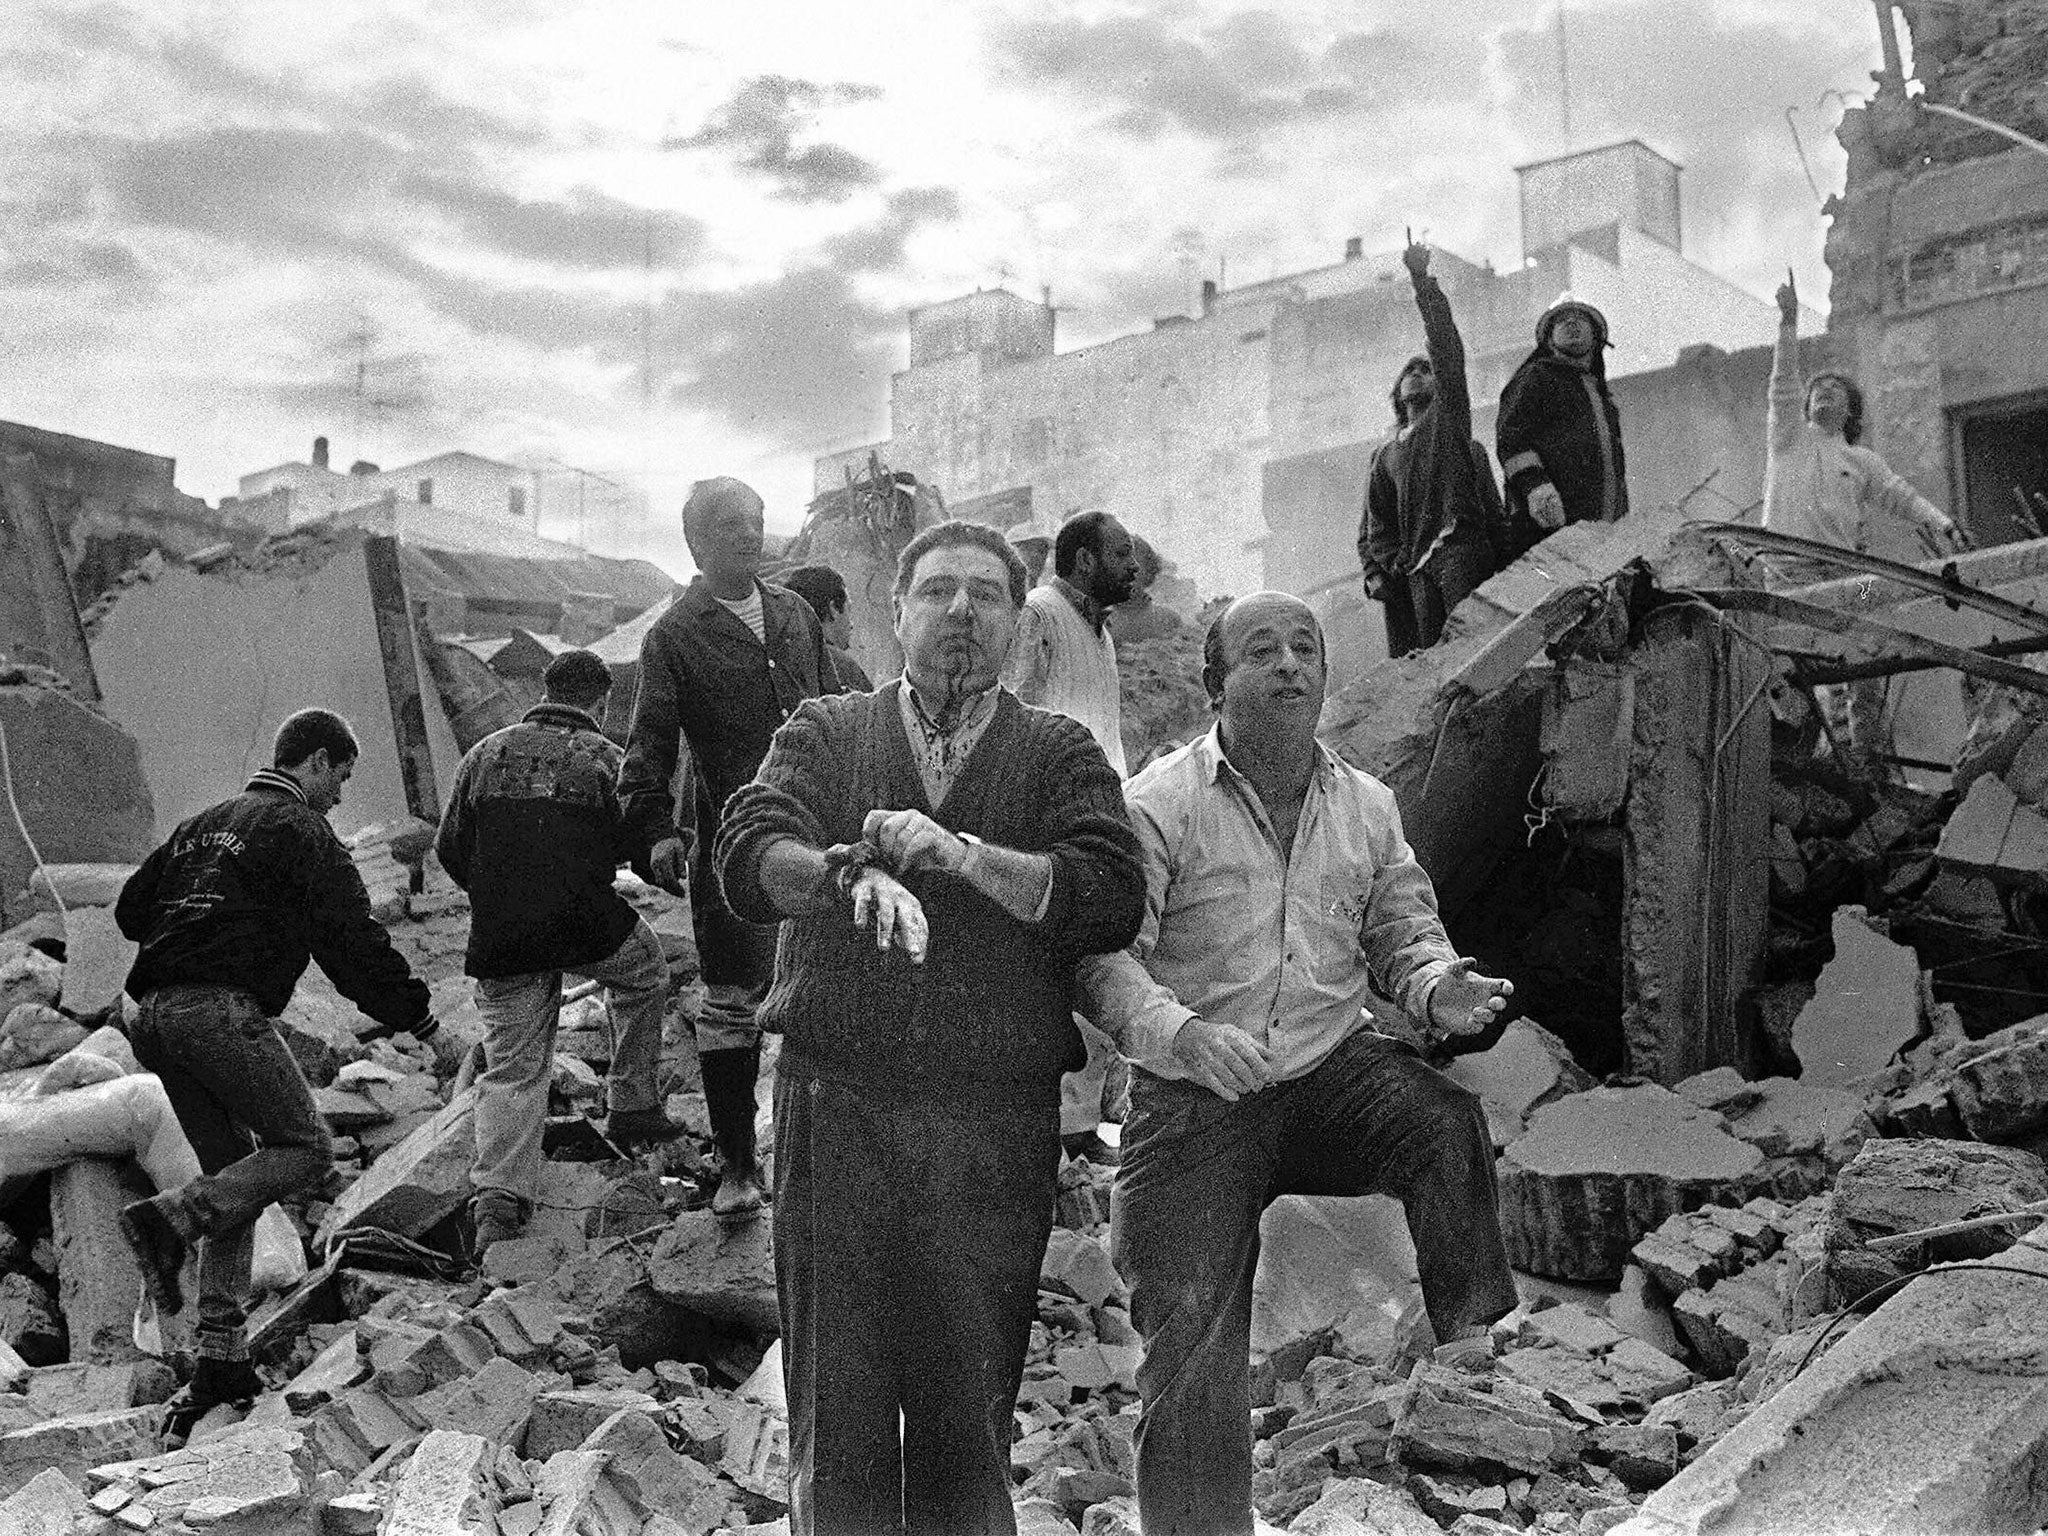 Firemen search as wounded people walk over the rubble left after a bomb exploded at the Argentinian Israelite Mutual Association (AMIA in Spanish) in Buenos Aires, 18 July 1994.